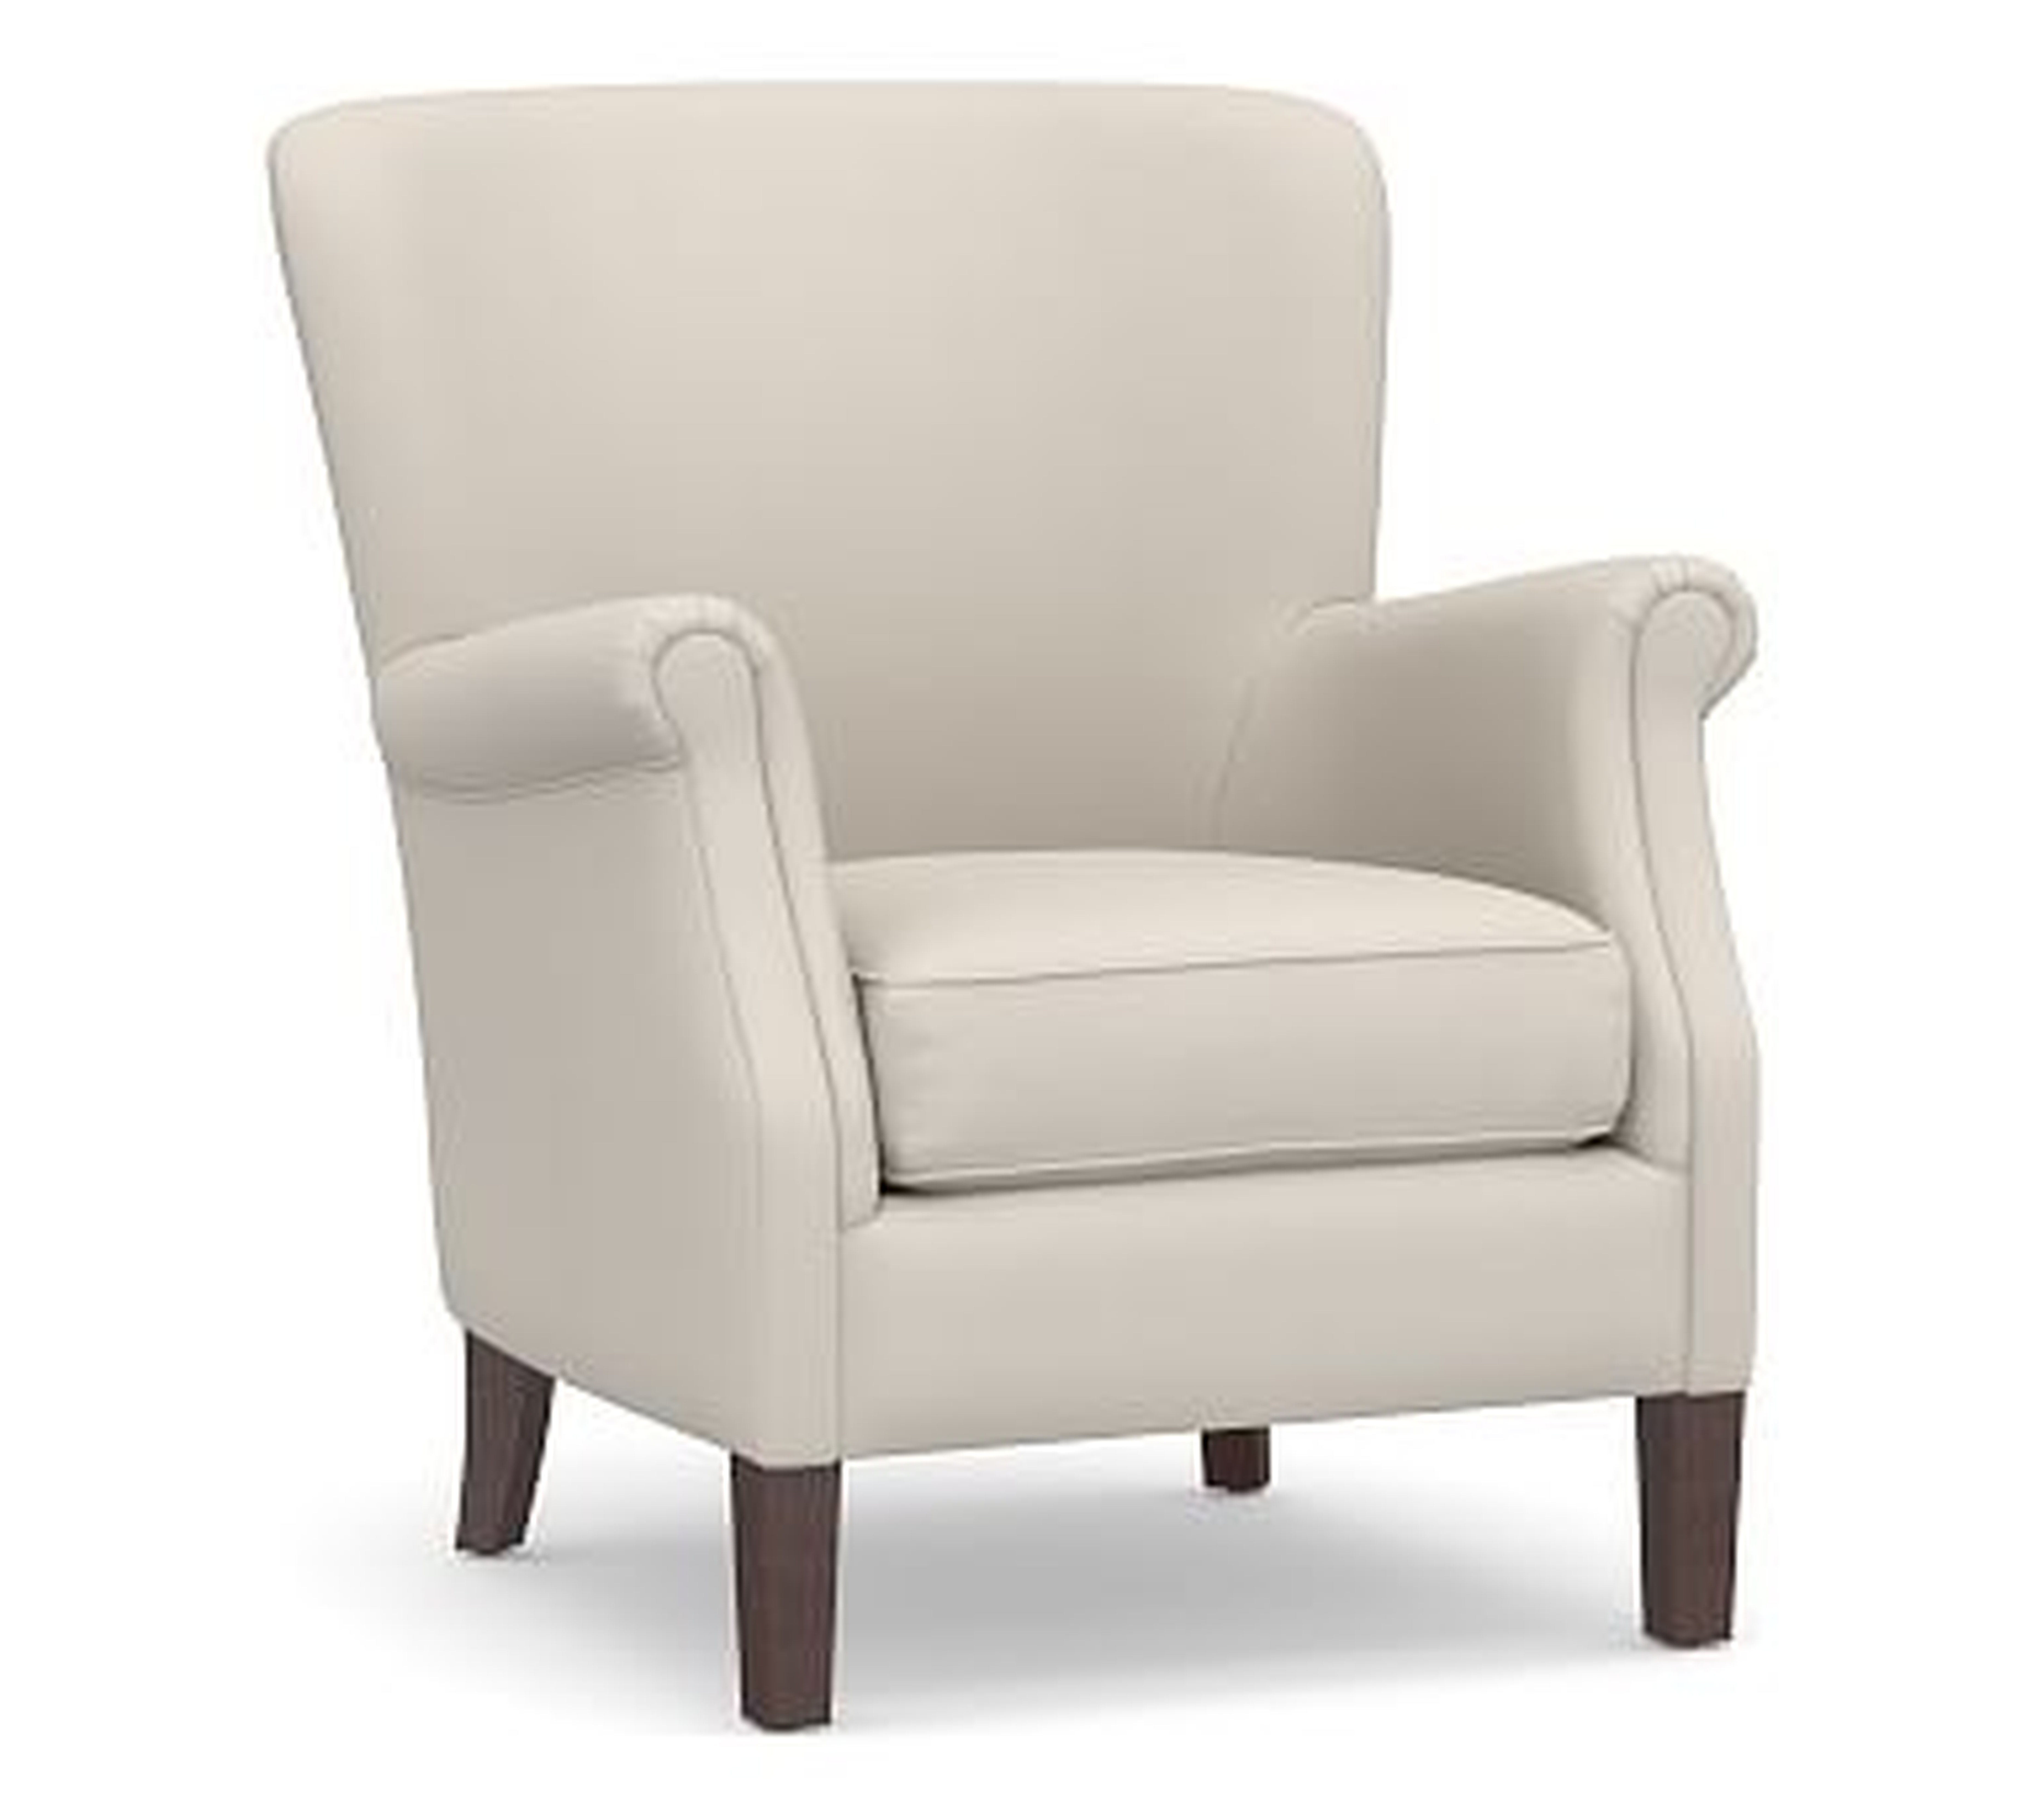 SoMa Minna Upholstered Armchair, Polyester Wrapped Cushions, Performance Twill Stone - Pottery Barn